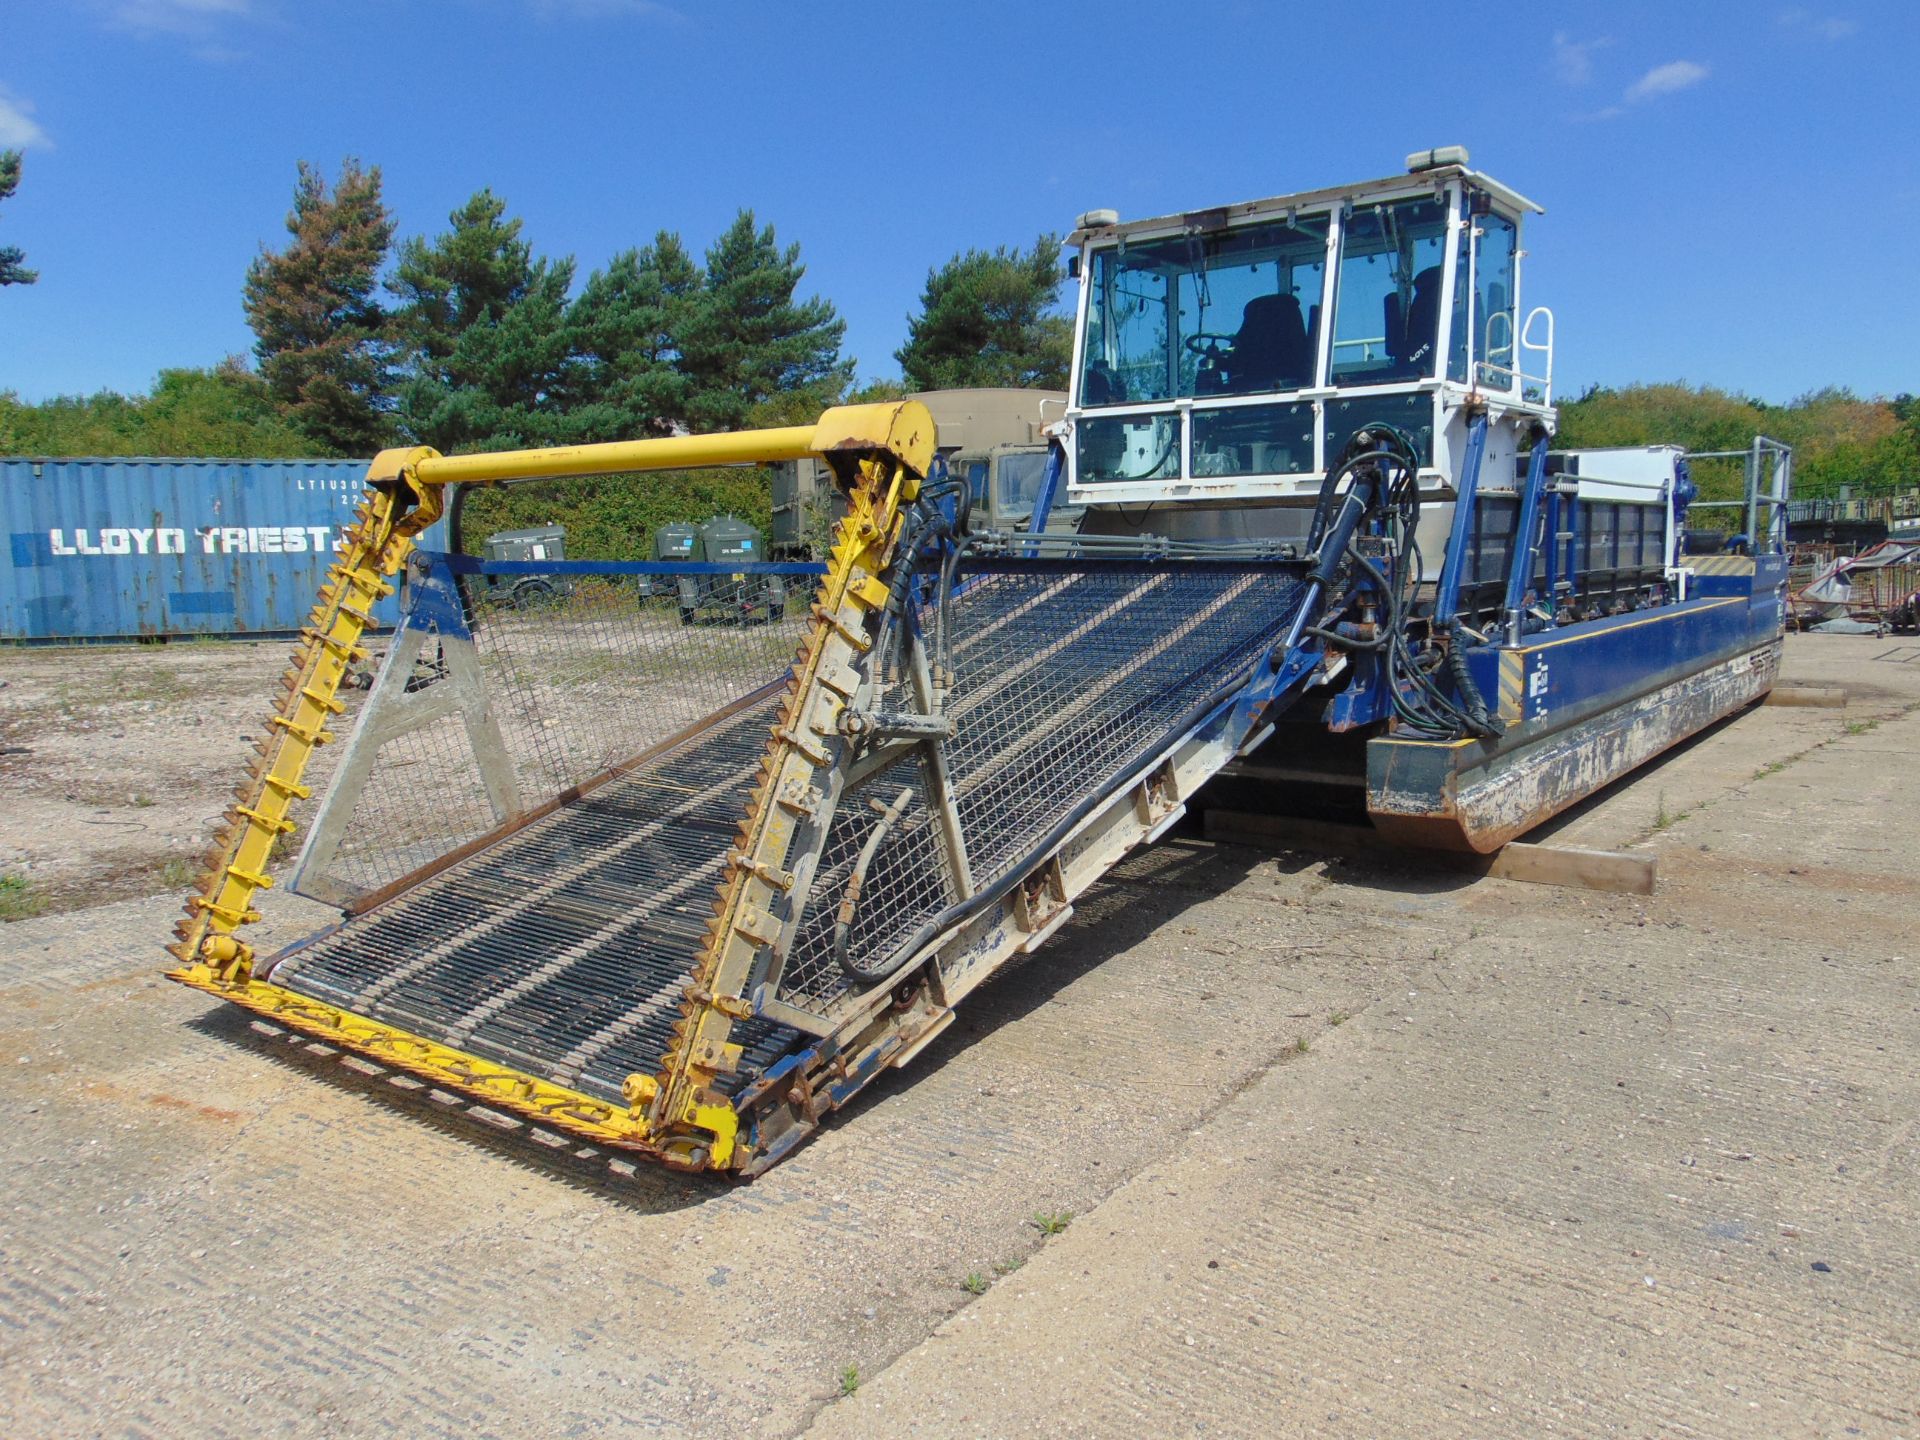 2012 Berky Type 6530 Aquatic Weed Harvester from the UK Environment Agency